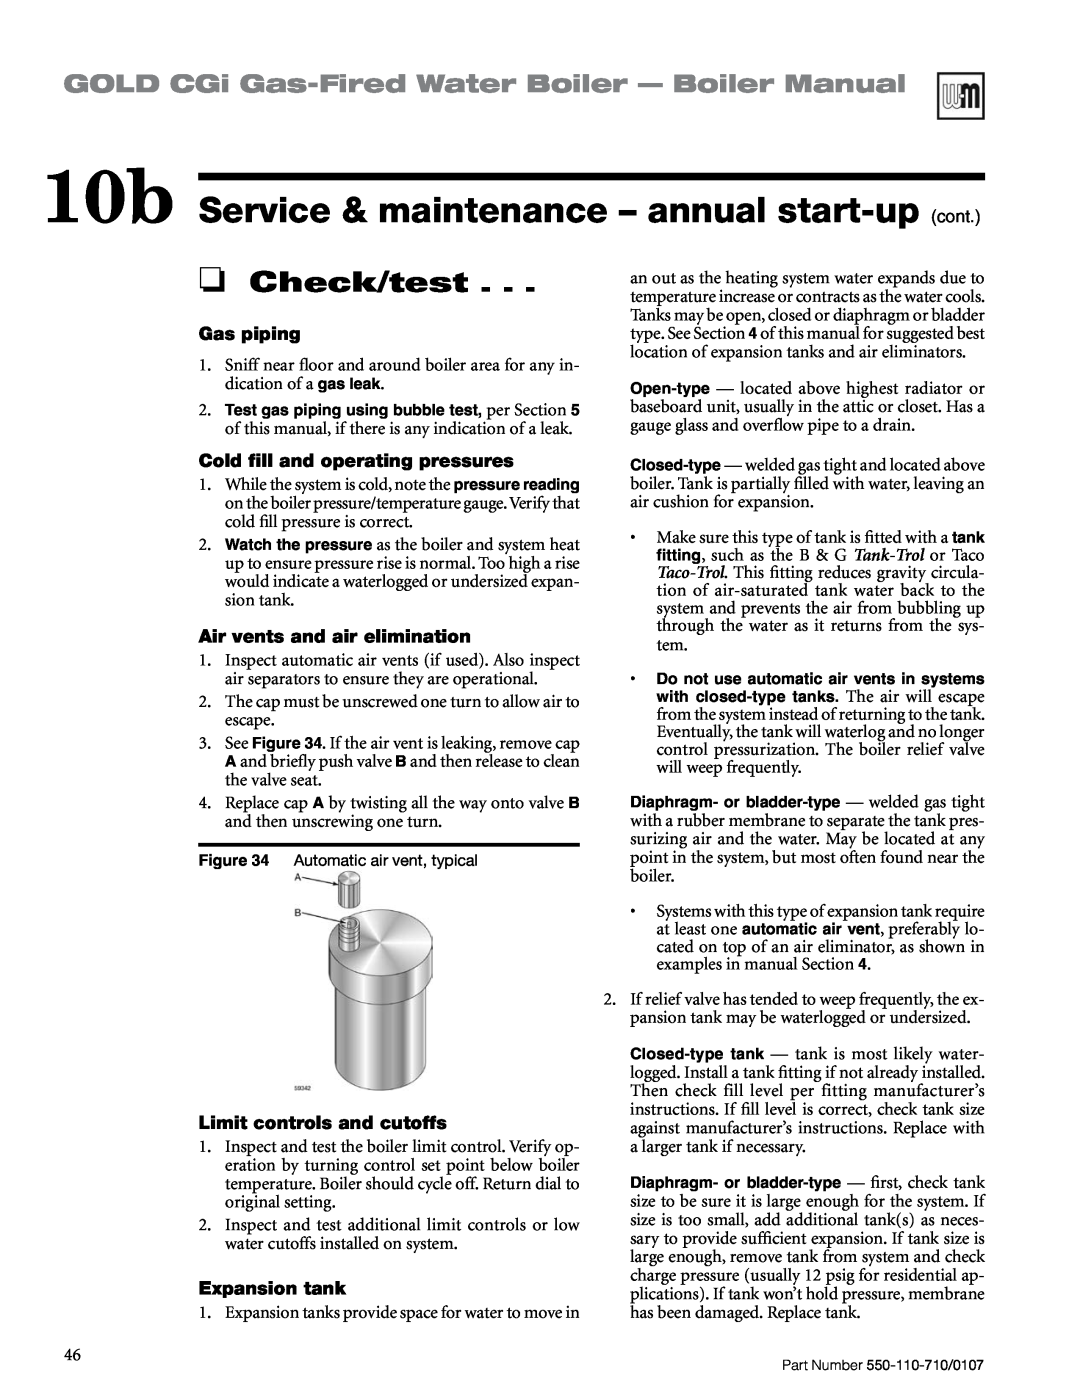 Weil-McLain 550-110-710/0107 Check/test, 10b Service & maintenance – annual start-up cont, Gas piping, Expansion tank 